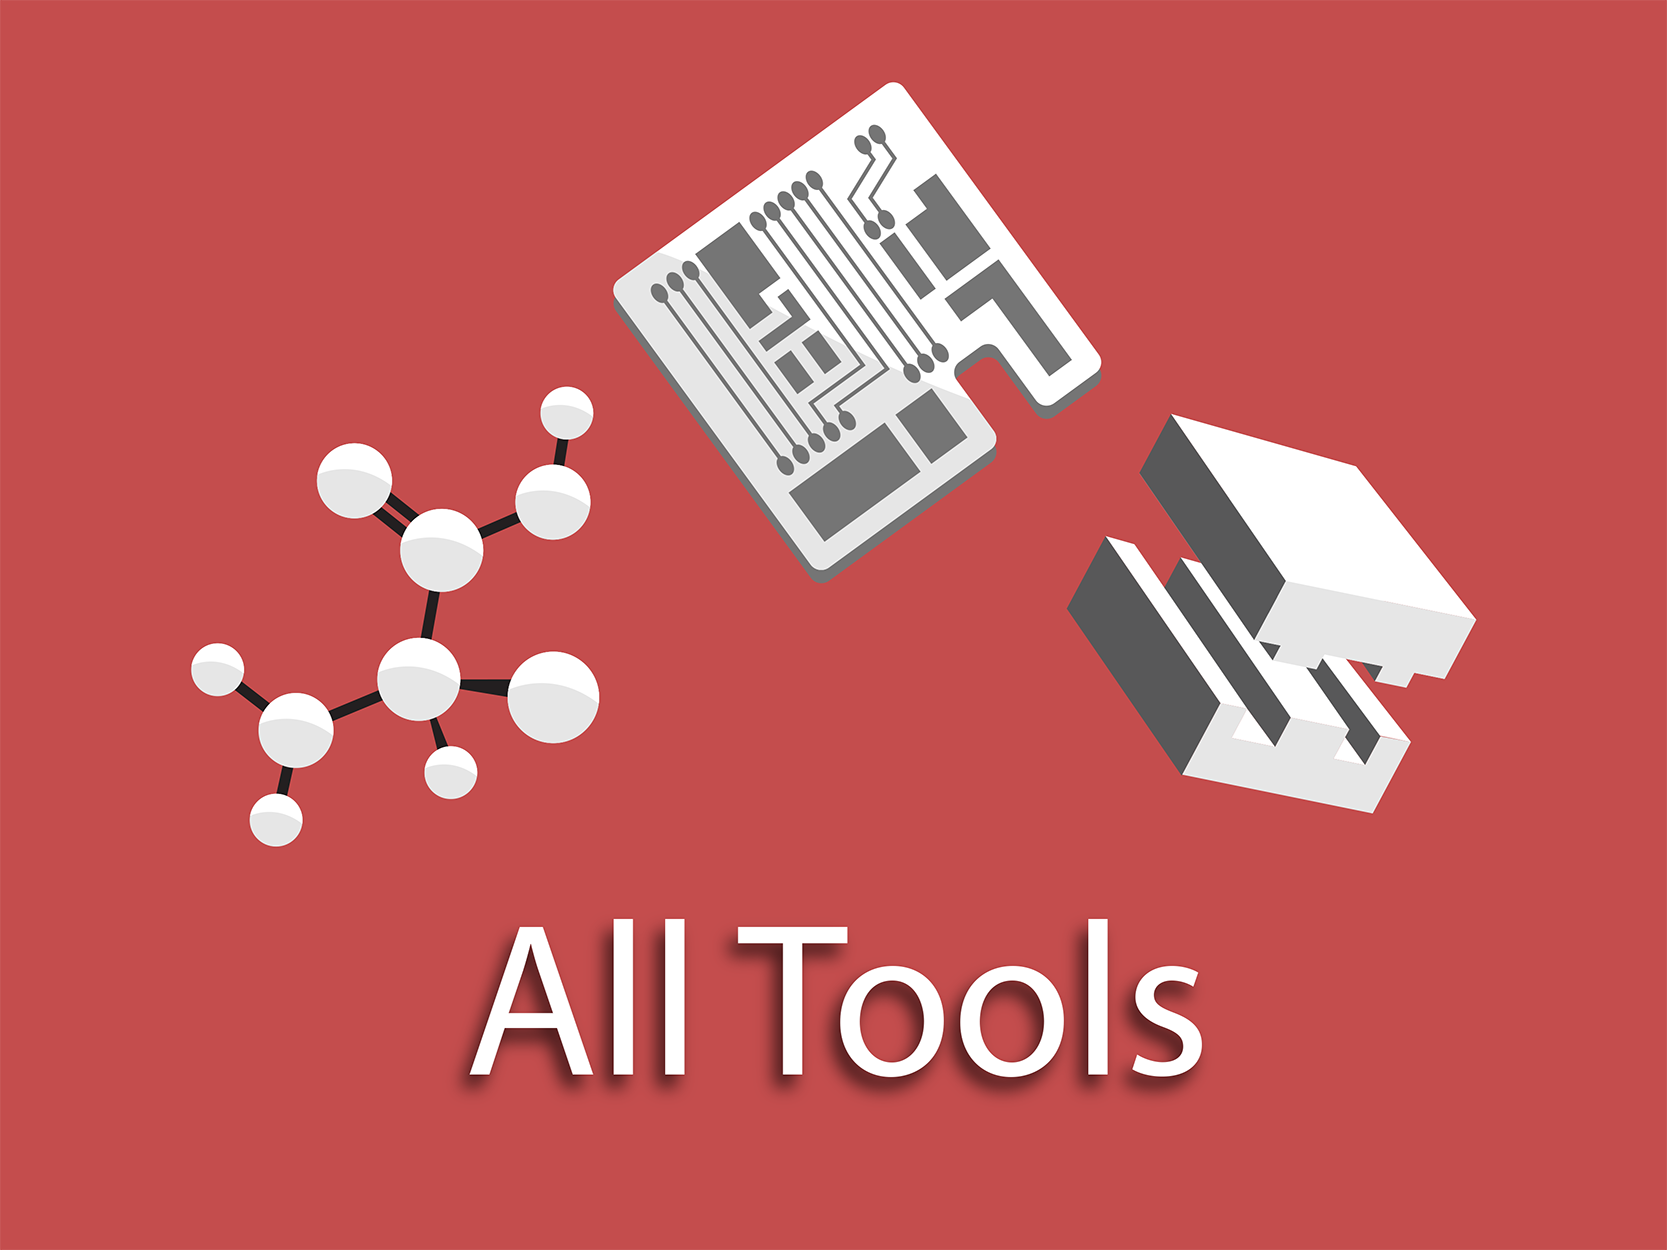 Click here to see the full list of all tools